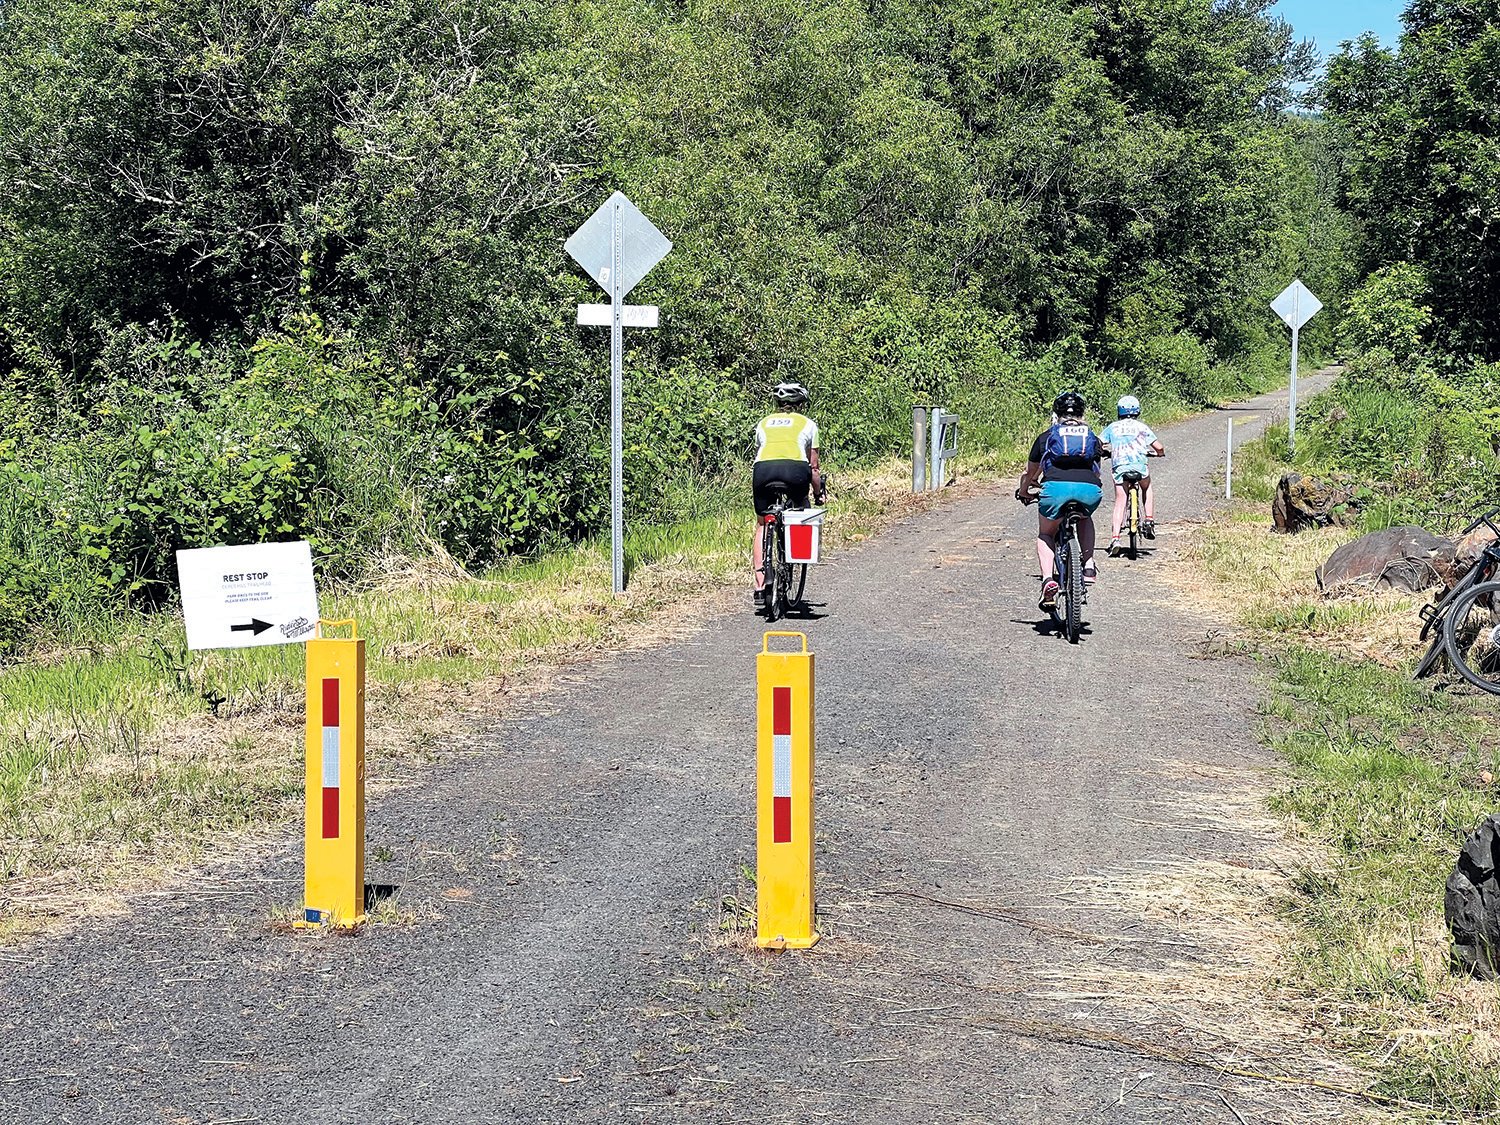 Riders pull away from the Ceres rest stop to head west on the trail and finish their ride on the Willapa Hills Trail.